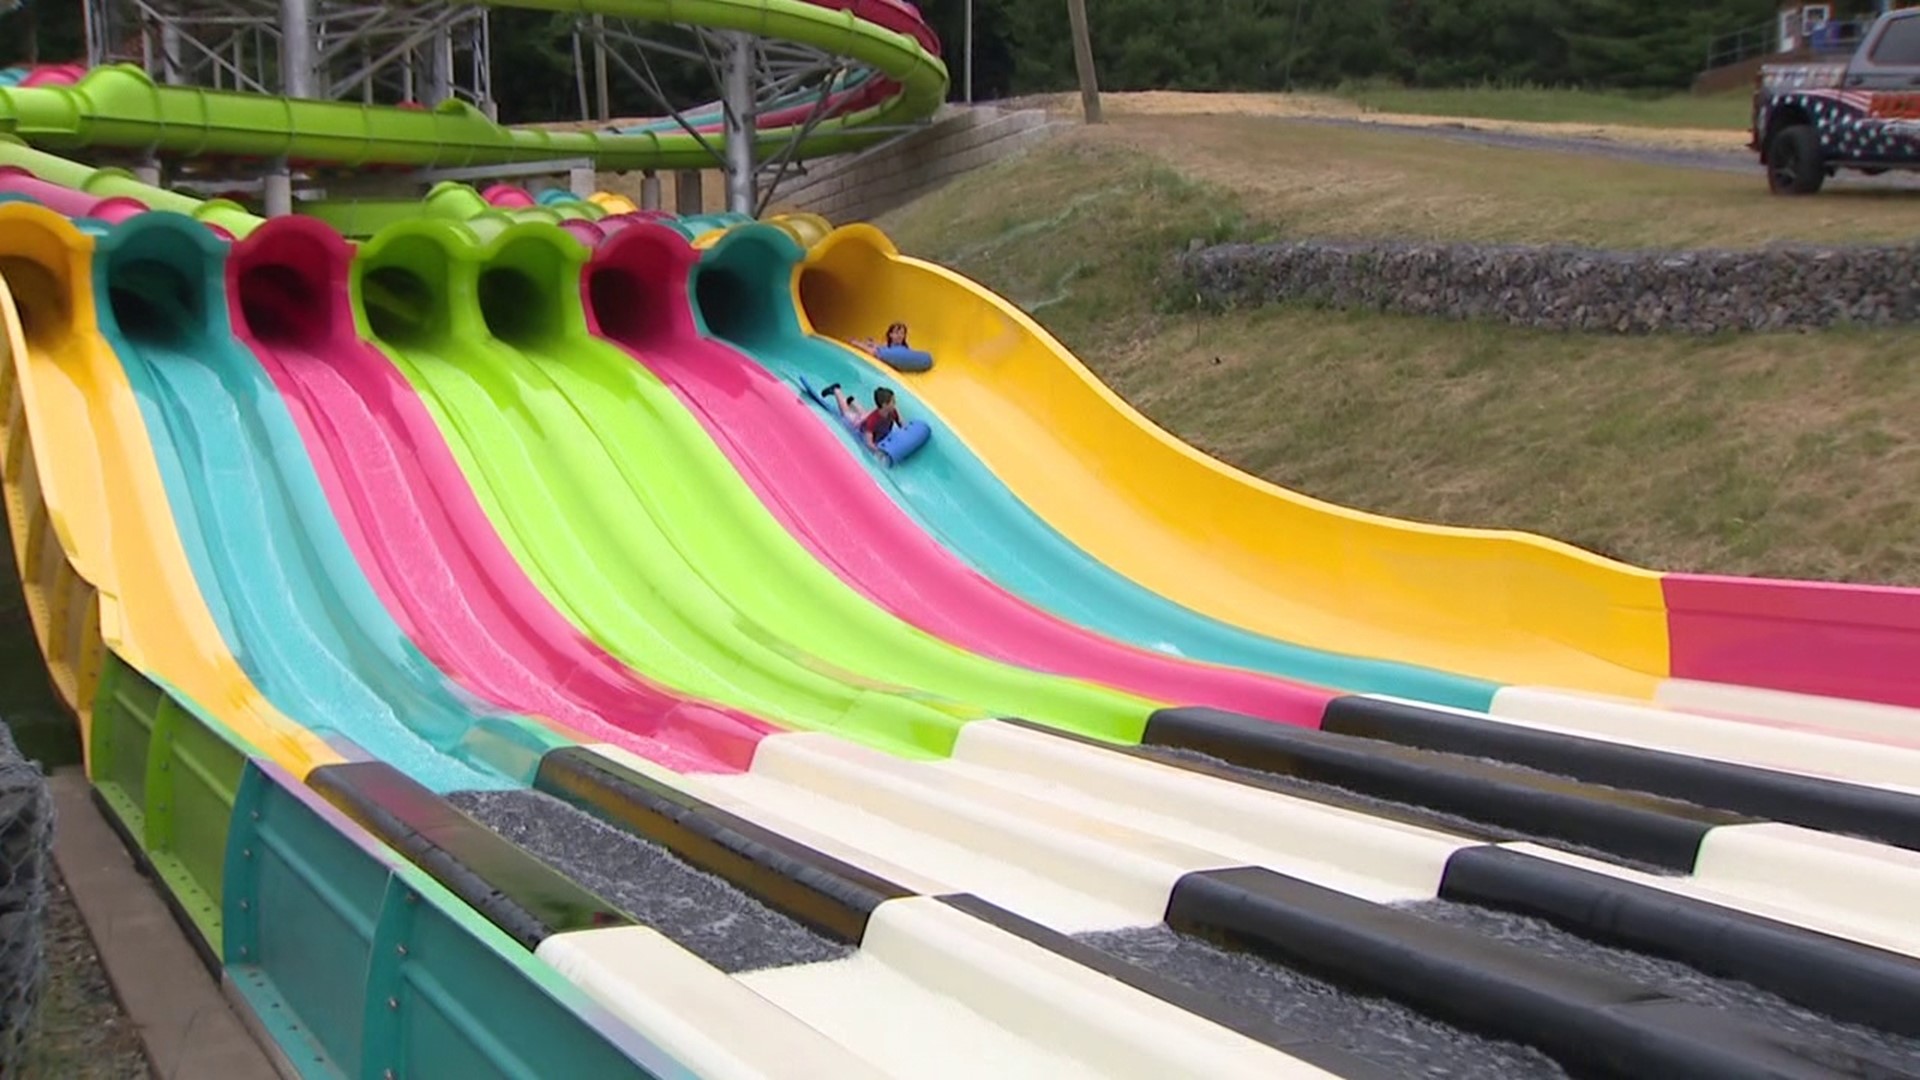 The biggest outdoor water park in Pennsylvania opened its newest attraction, 'Rival Racer,' on Friday.